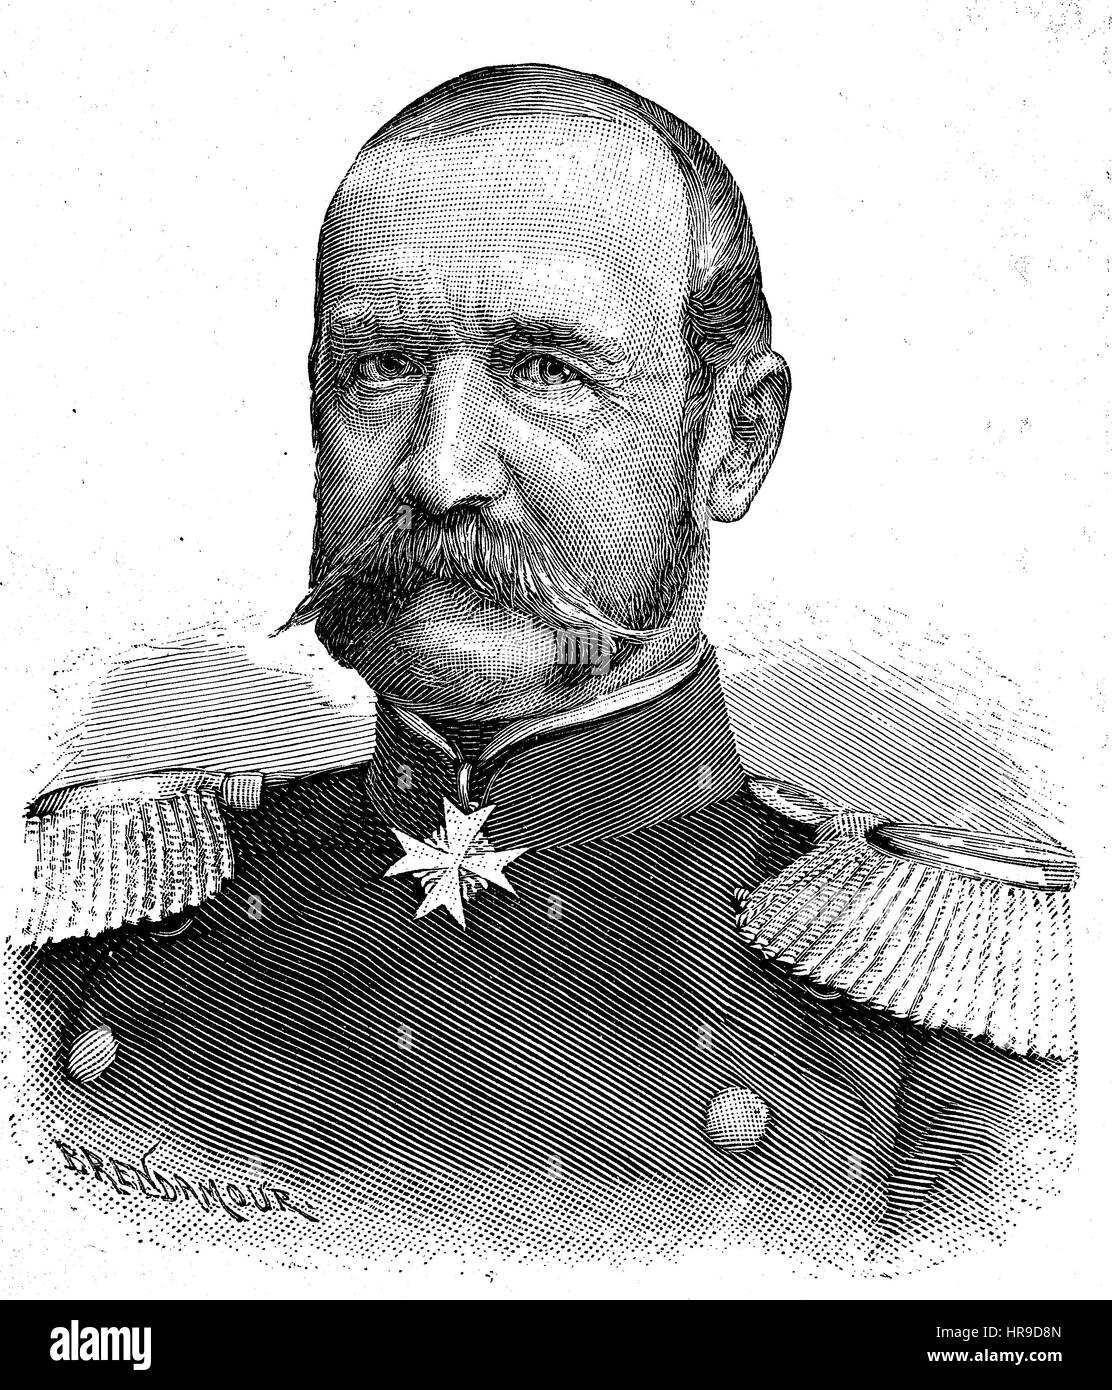 Rudolf Ferdinand von Kummer, 1816 - 1900, Was a Prussian officer, lastly General of the infantry, Situation from the time of The Franco-Prussian War or Franco-German War,  Deutsch-Franzoesischer Krieg, 1870-1871, Reproduction of an original woodcut from the year 1885, digital improved Stock Photo